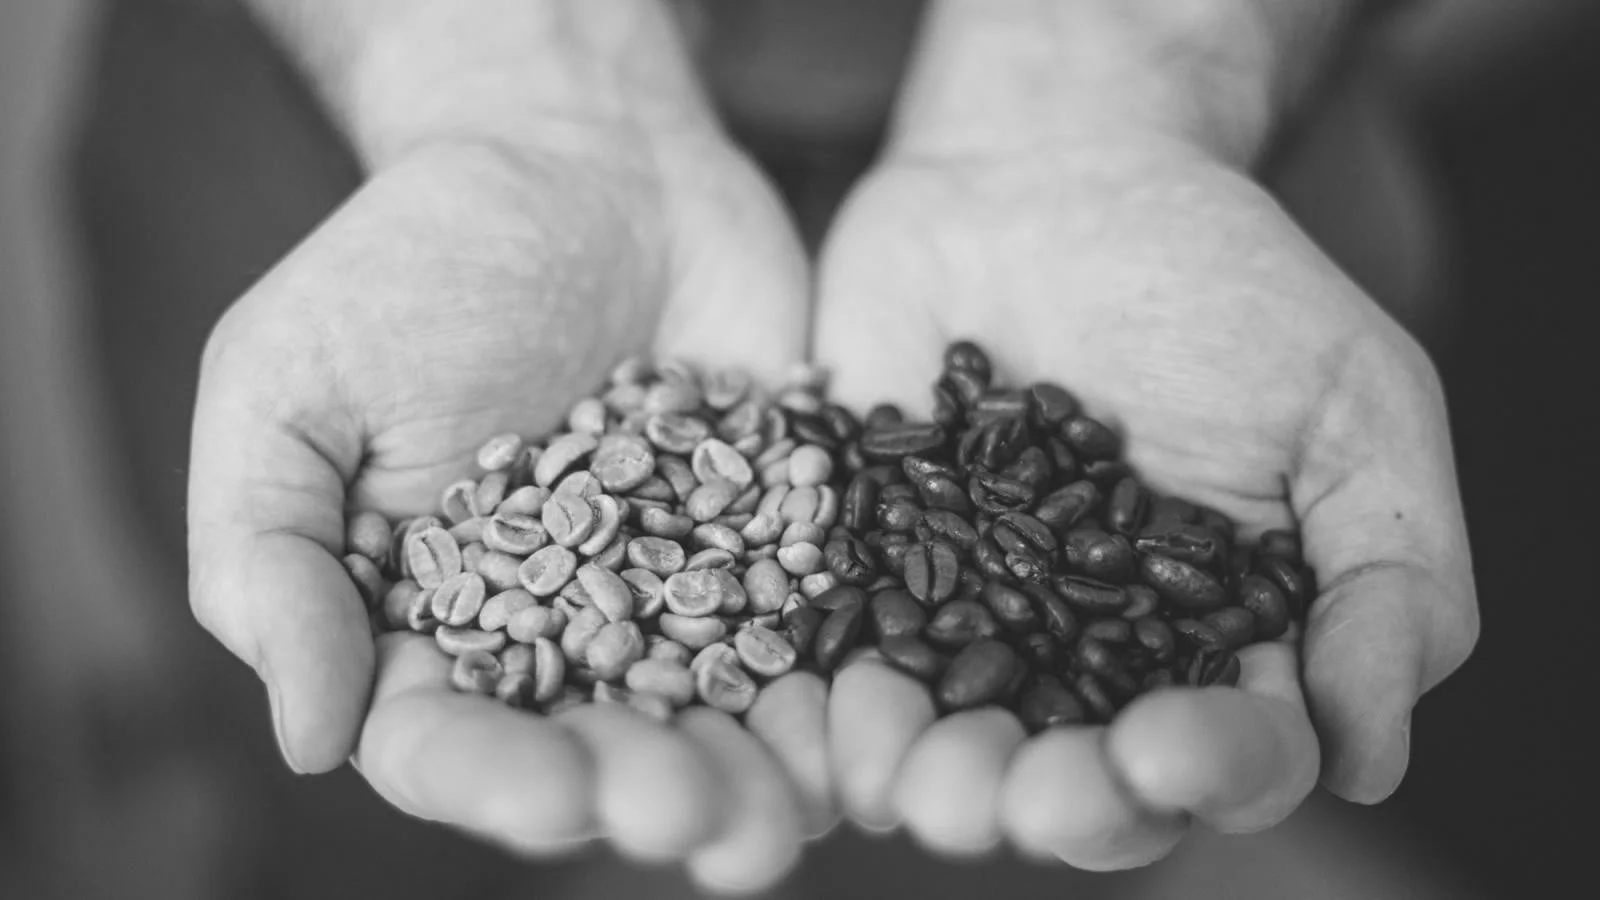 TIMELINE: A story of coffee